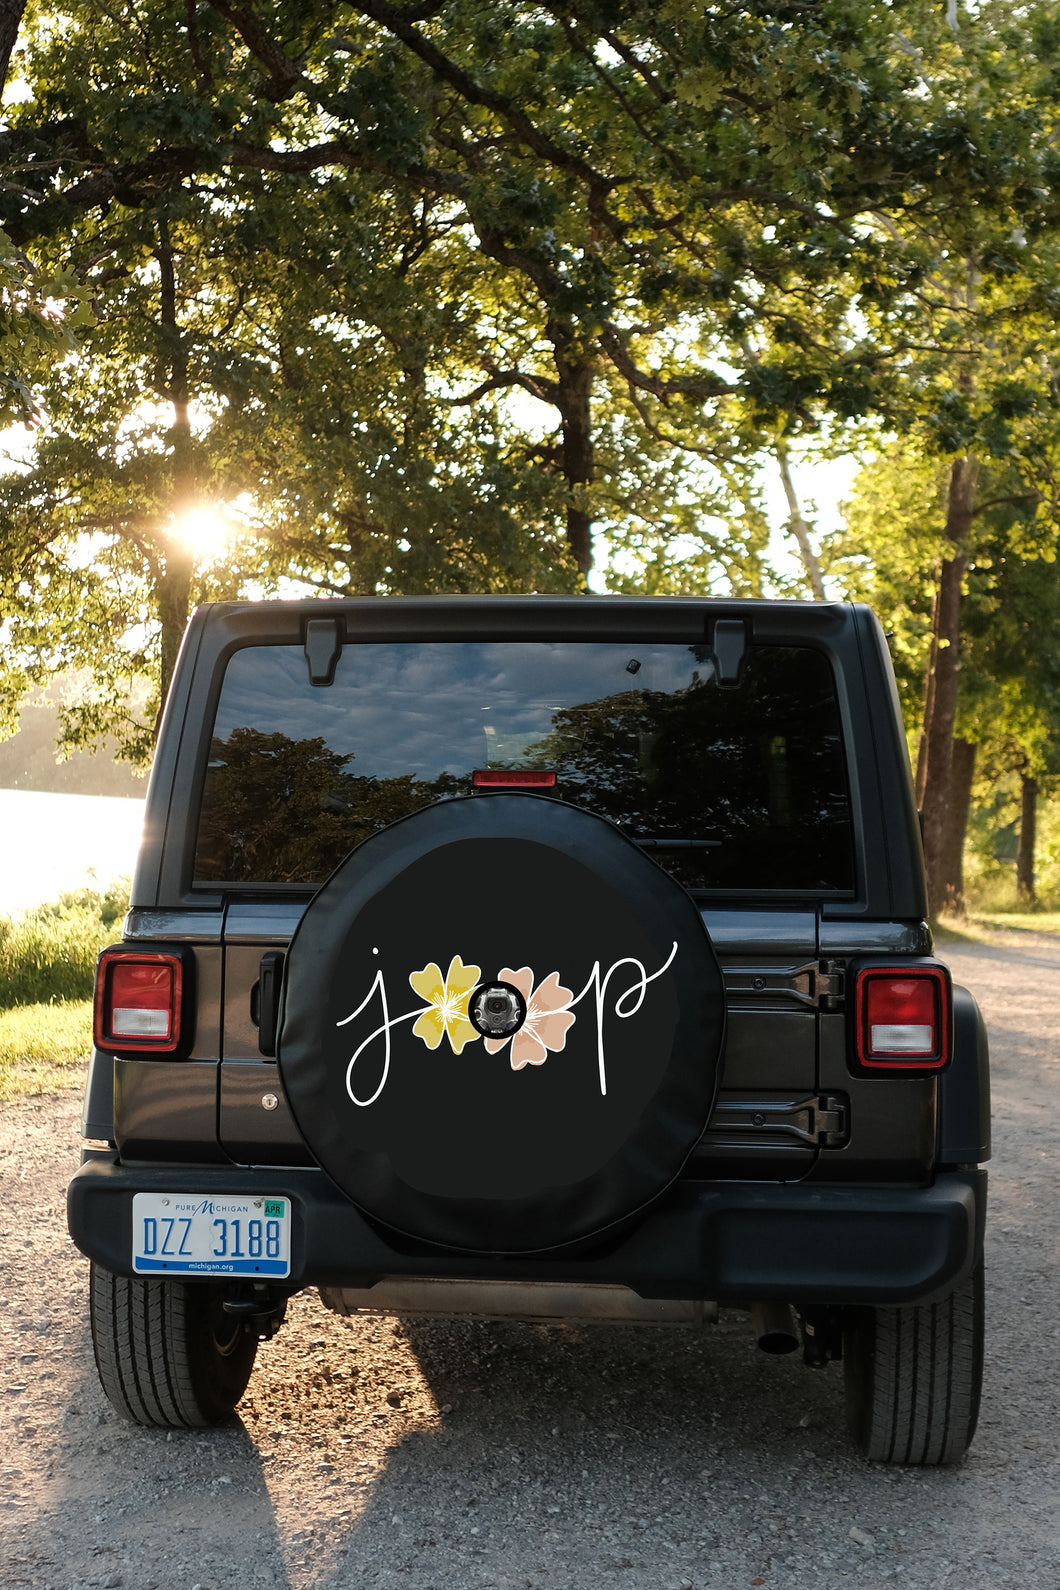 Warehouse Sale - Discounted Floral Jeep Tire Cover for Backup Camera